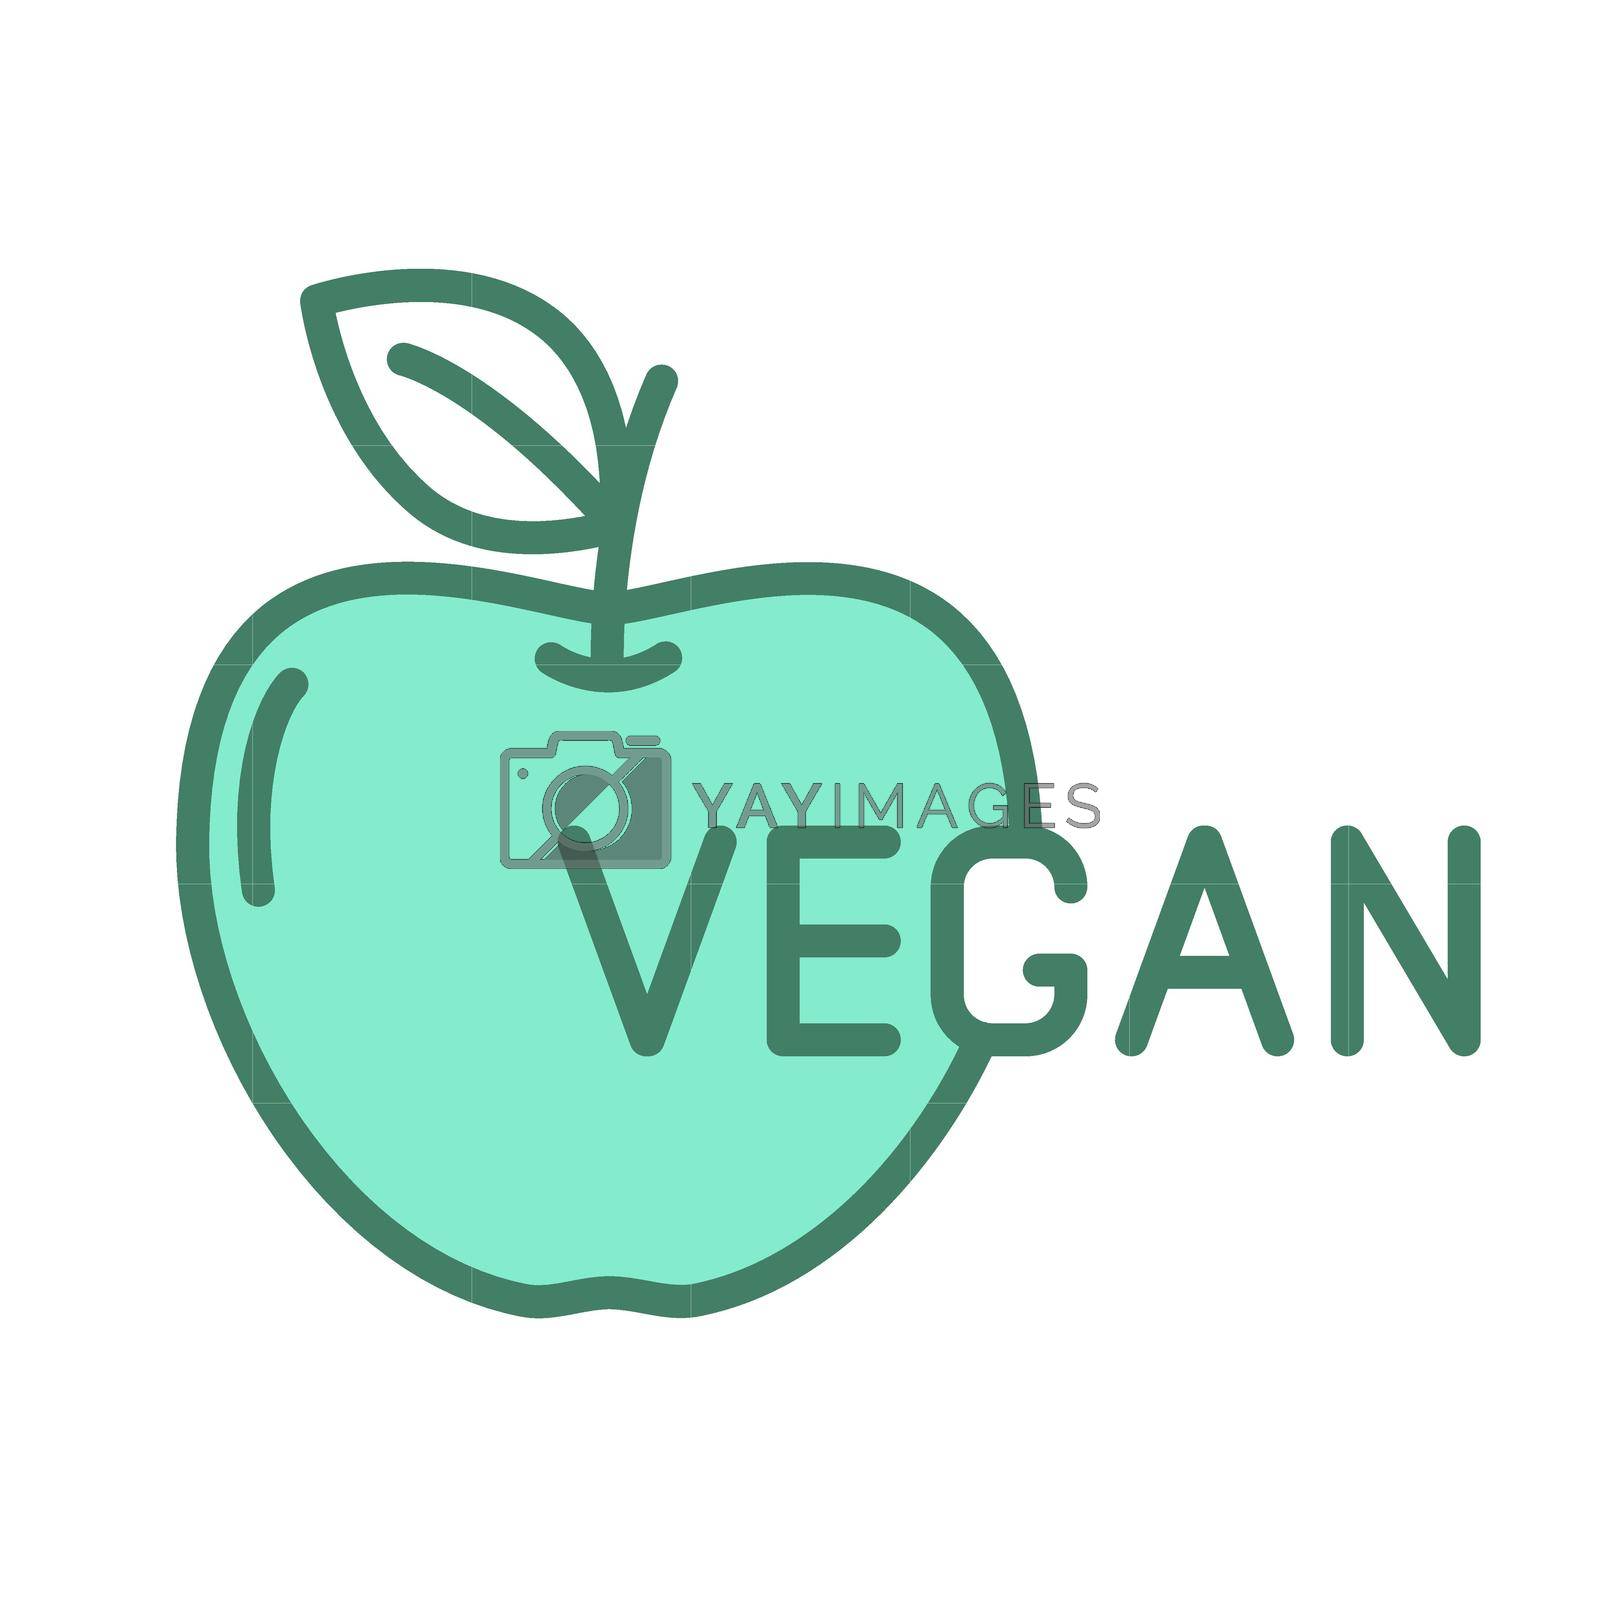 Royalty free image of vegan line vector icon in two colors isolated on white background. vegan friendly green icon for web design, ui, mobile apps and print by govindamadhava108